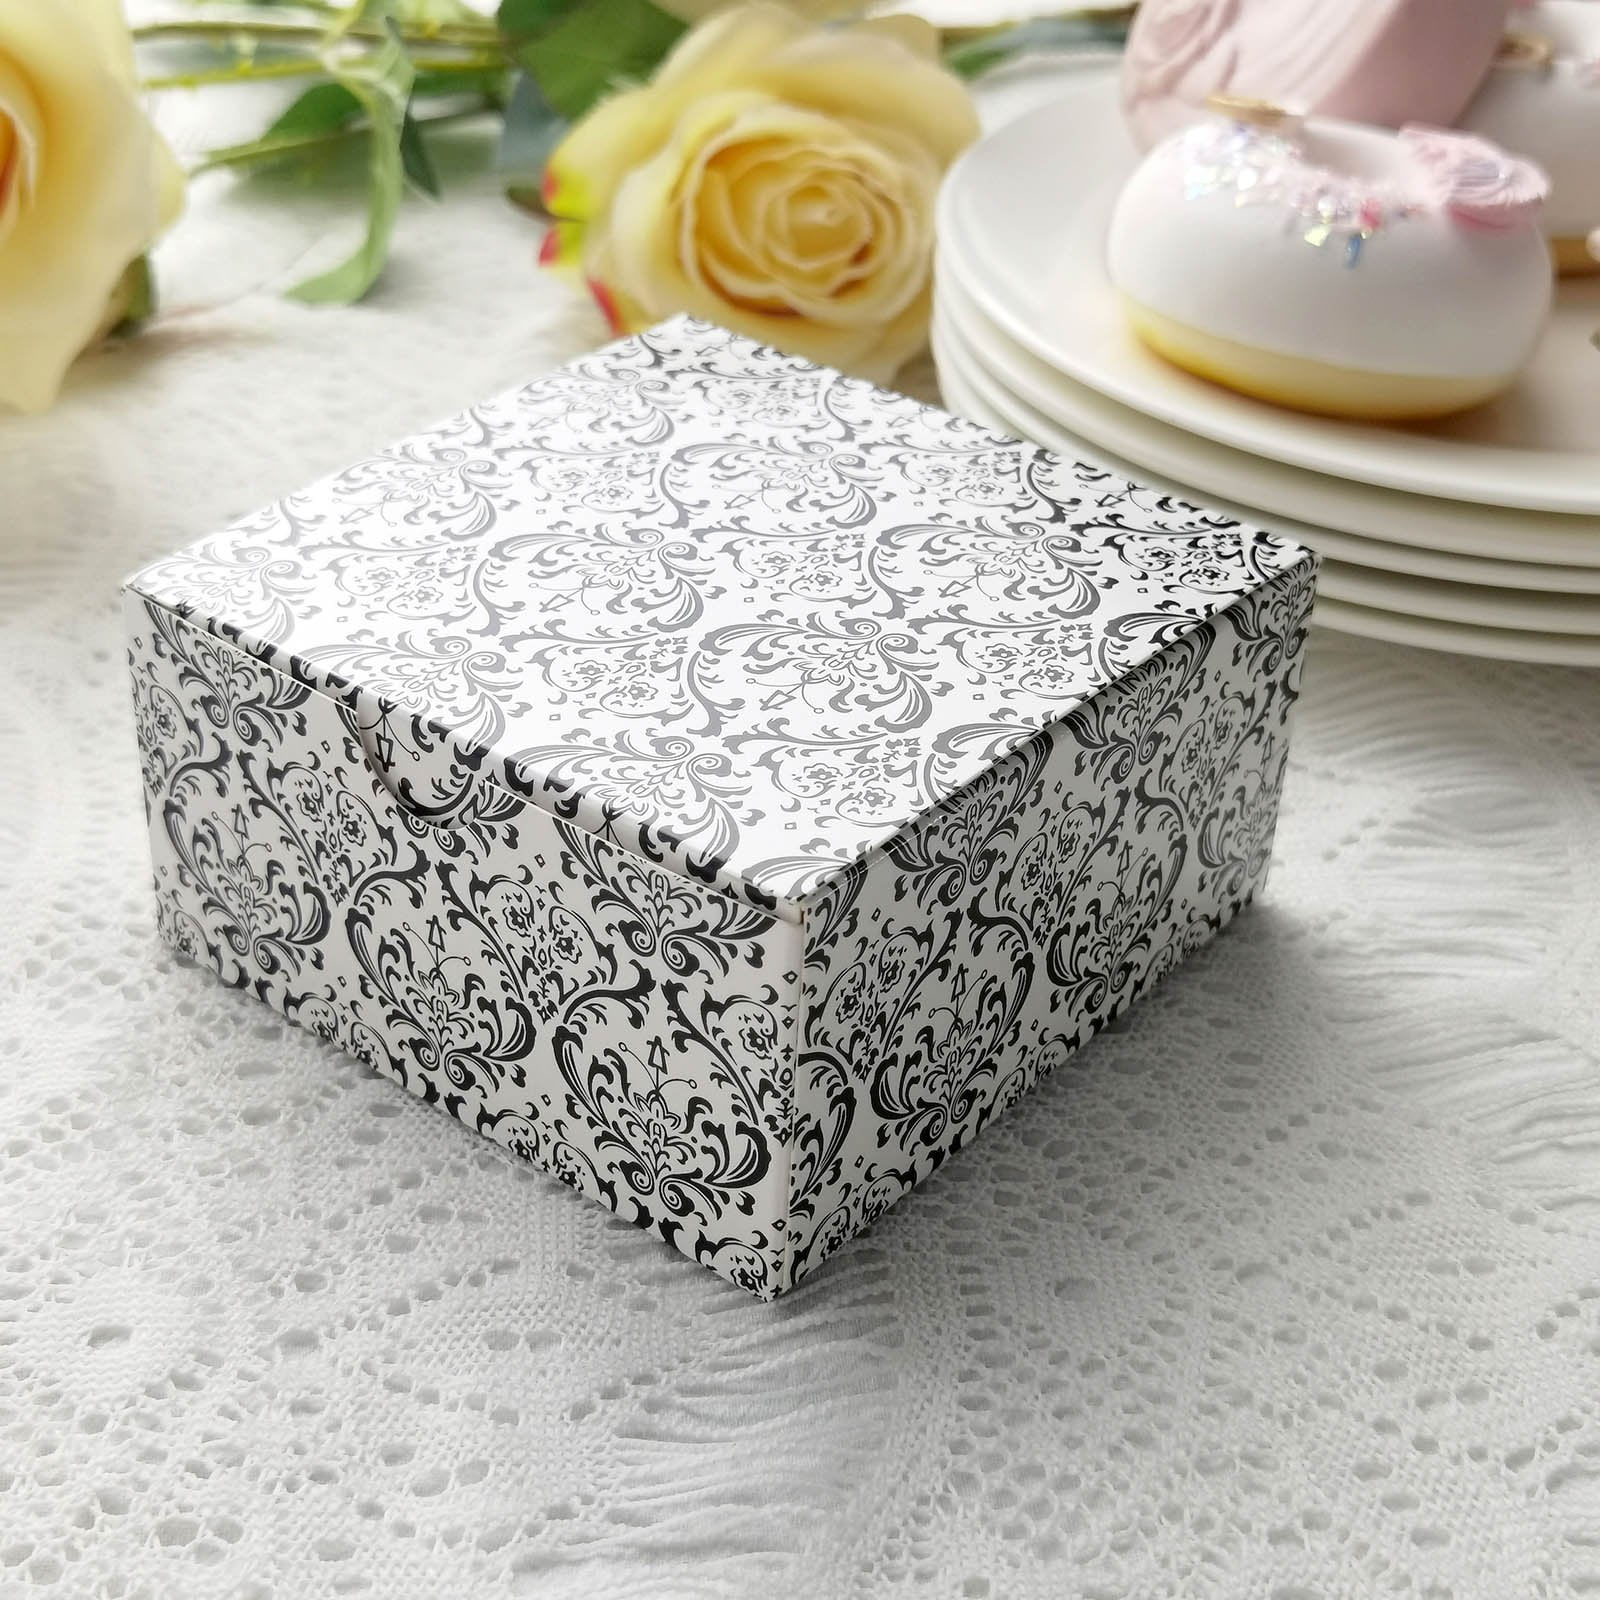 Gift Box White glossy 4x4x2 "Wedding Shower Party Favor Candy Cake Candle Soap 